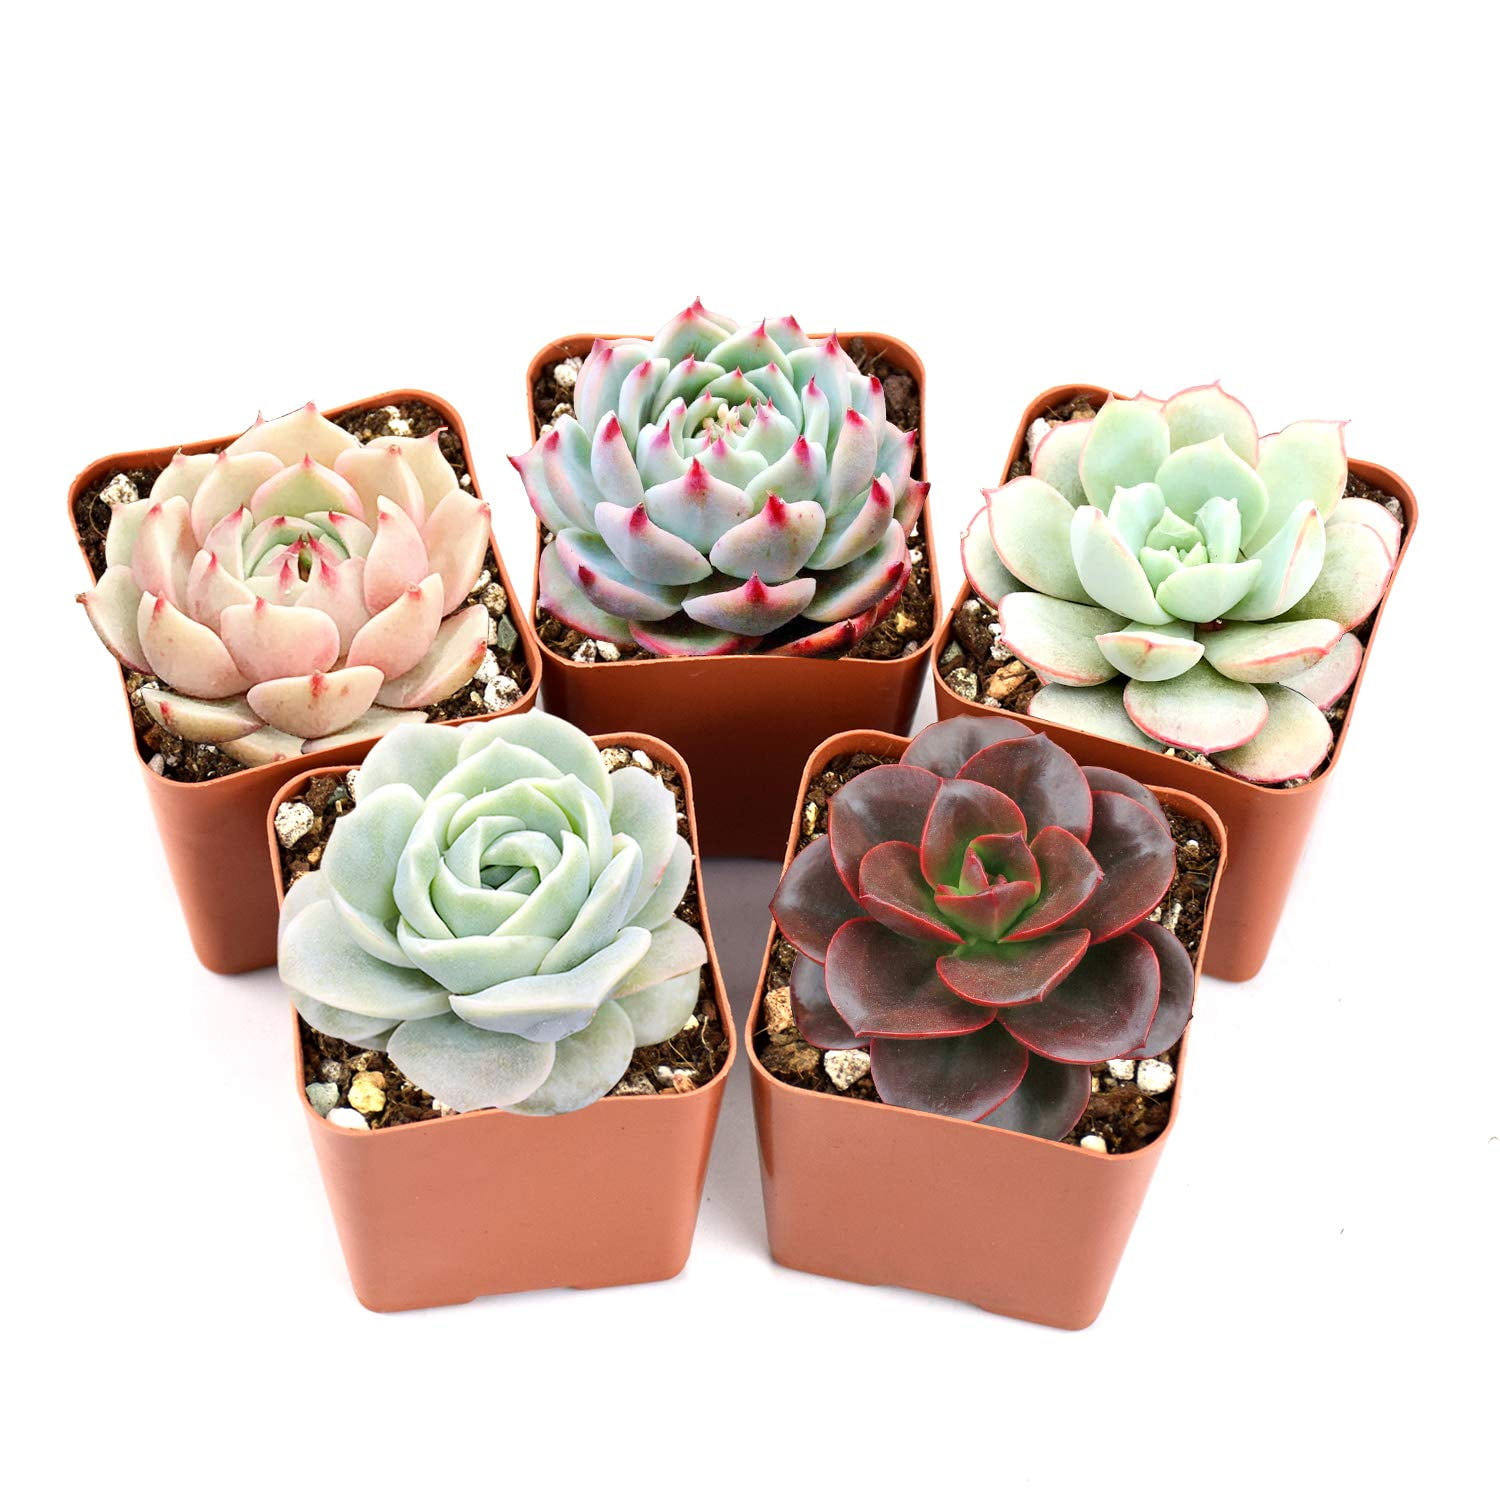 Succulent Plants 7 Packs of Assorted Rosettes Fully Rooted in 2'' Planter Pots 